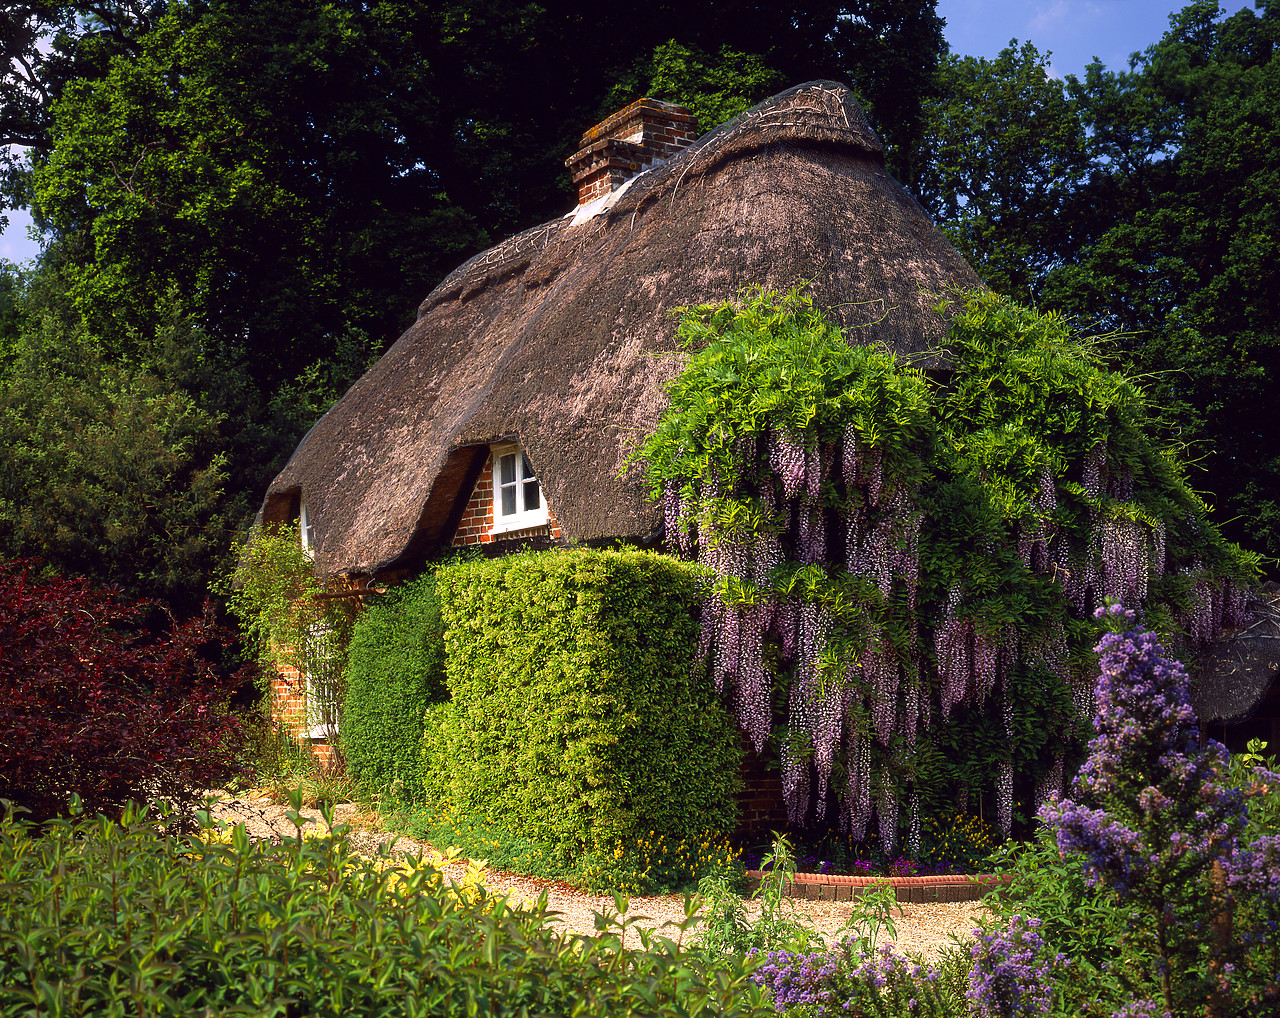 #980696-2 - Thatched Cottage & Wysteria, Minstead, Hampshire, England